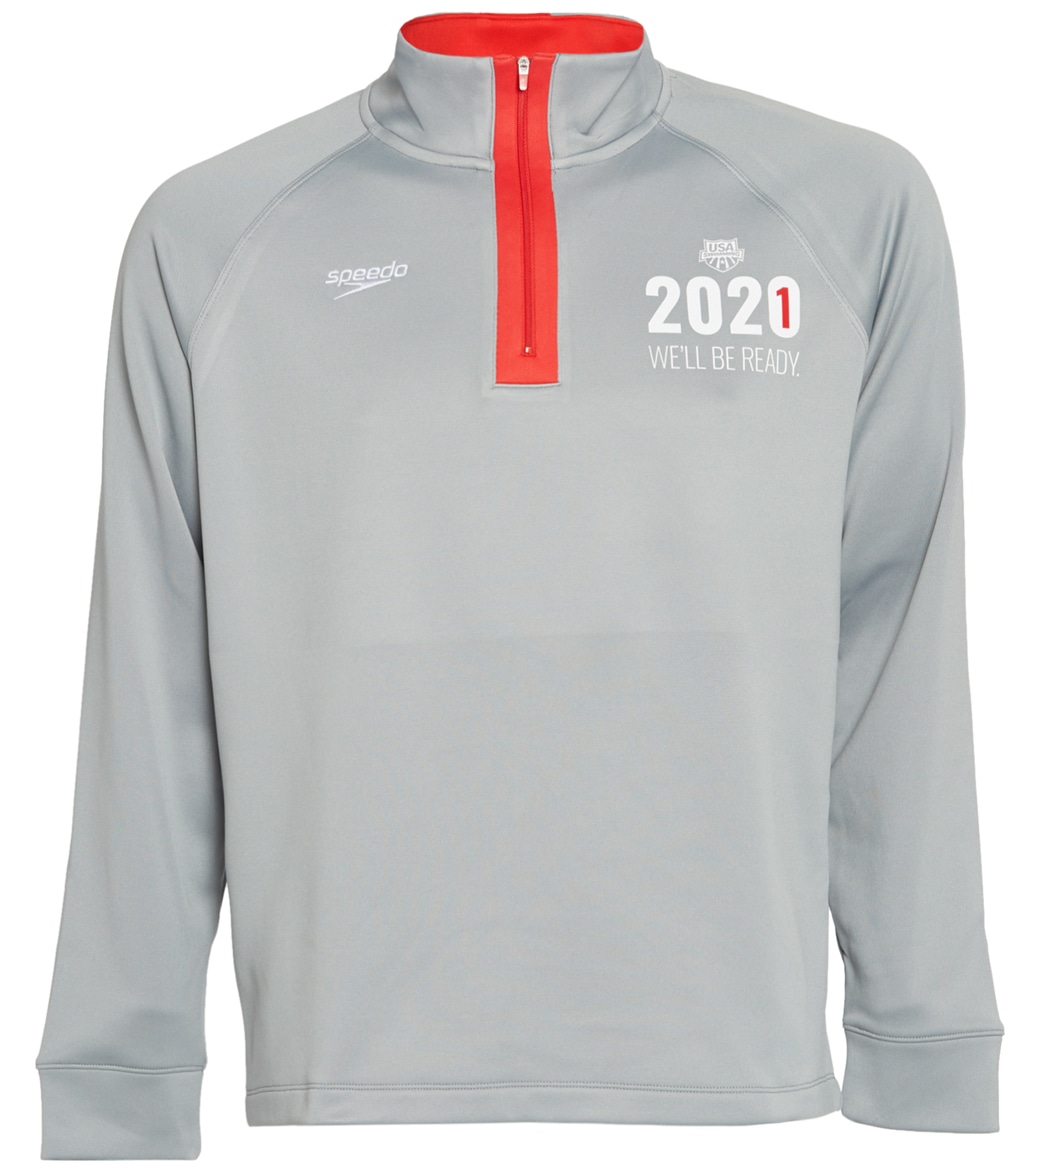 Usa Swimming Speedo Men's 2021 We'll Be Ready Zip Pullover Sweatshirt - Red Xs Size X-Small Polyester - Swimoutlet.com